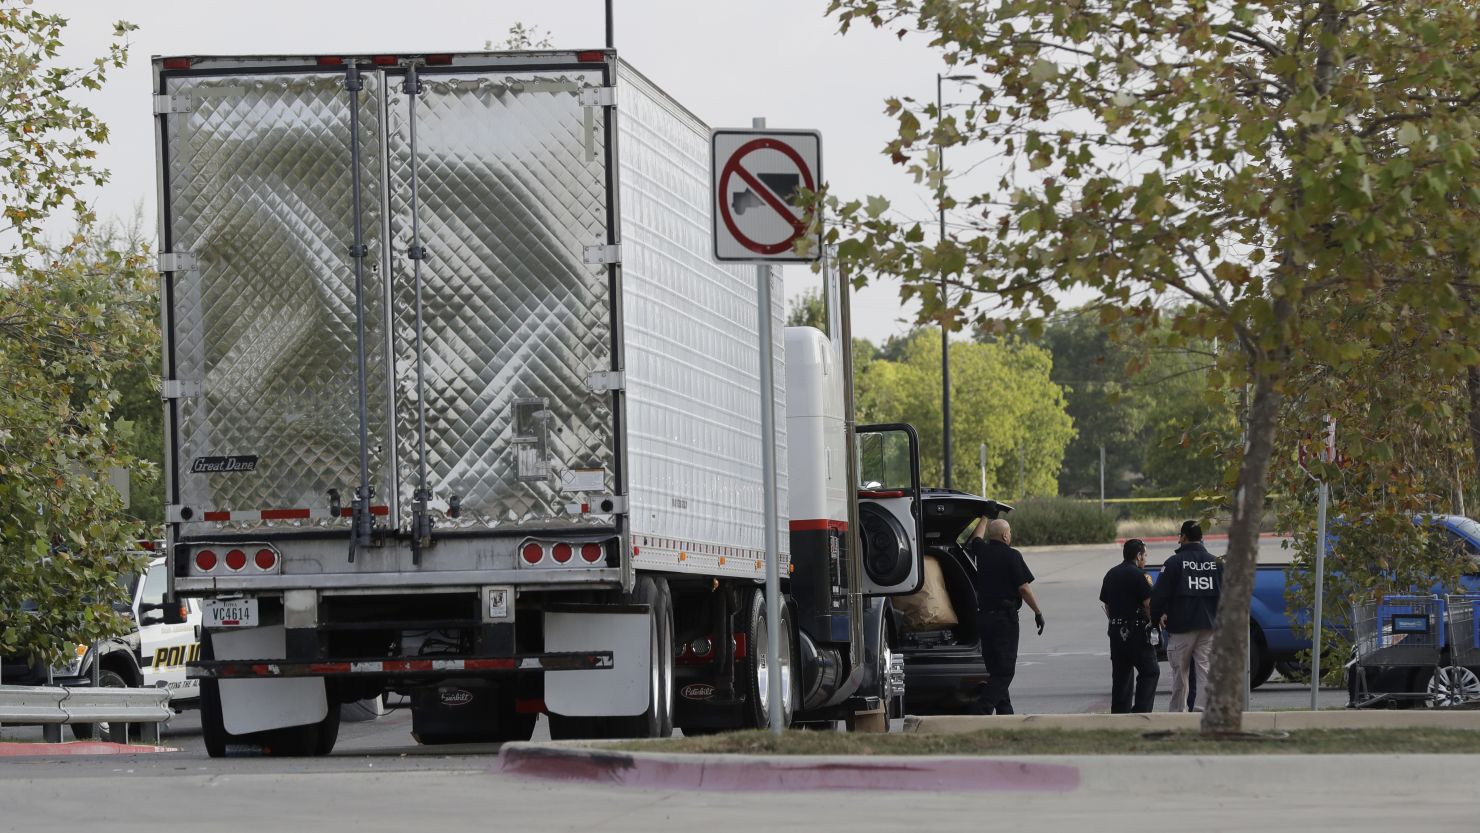 San Antonio police officers investigate the tractor-trailer that carried undocumented immigrants.